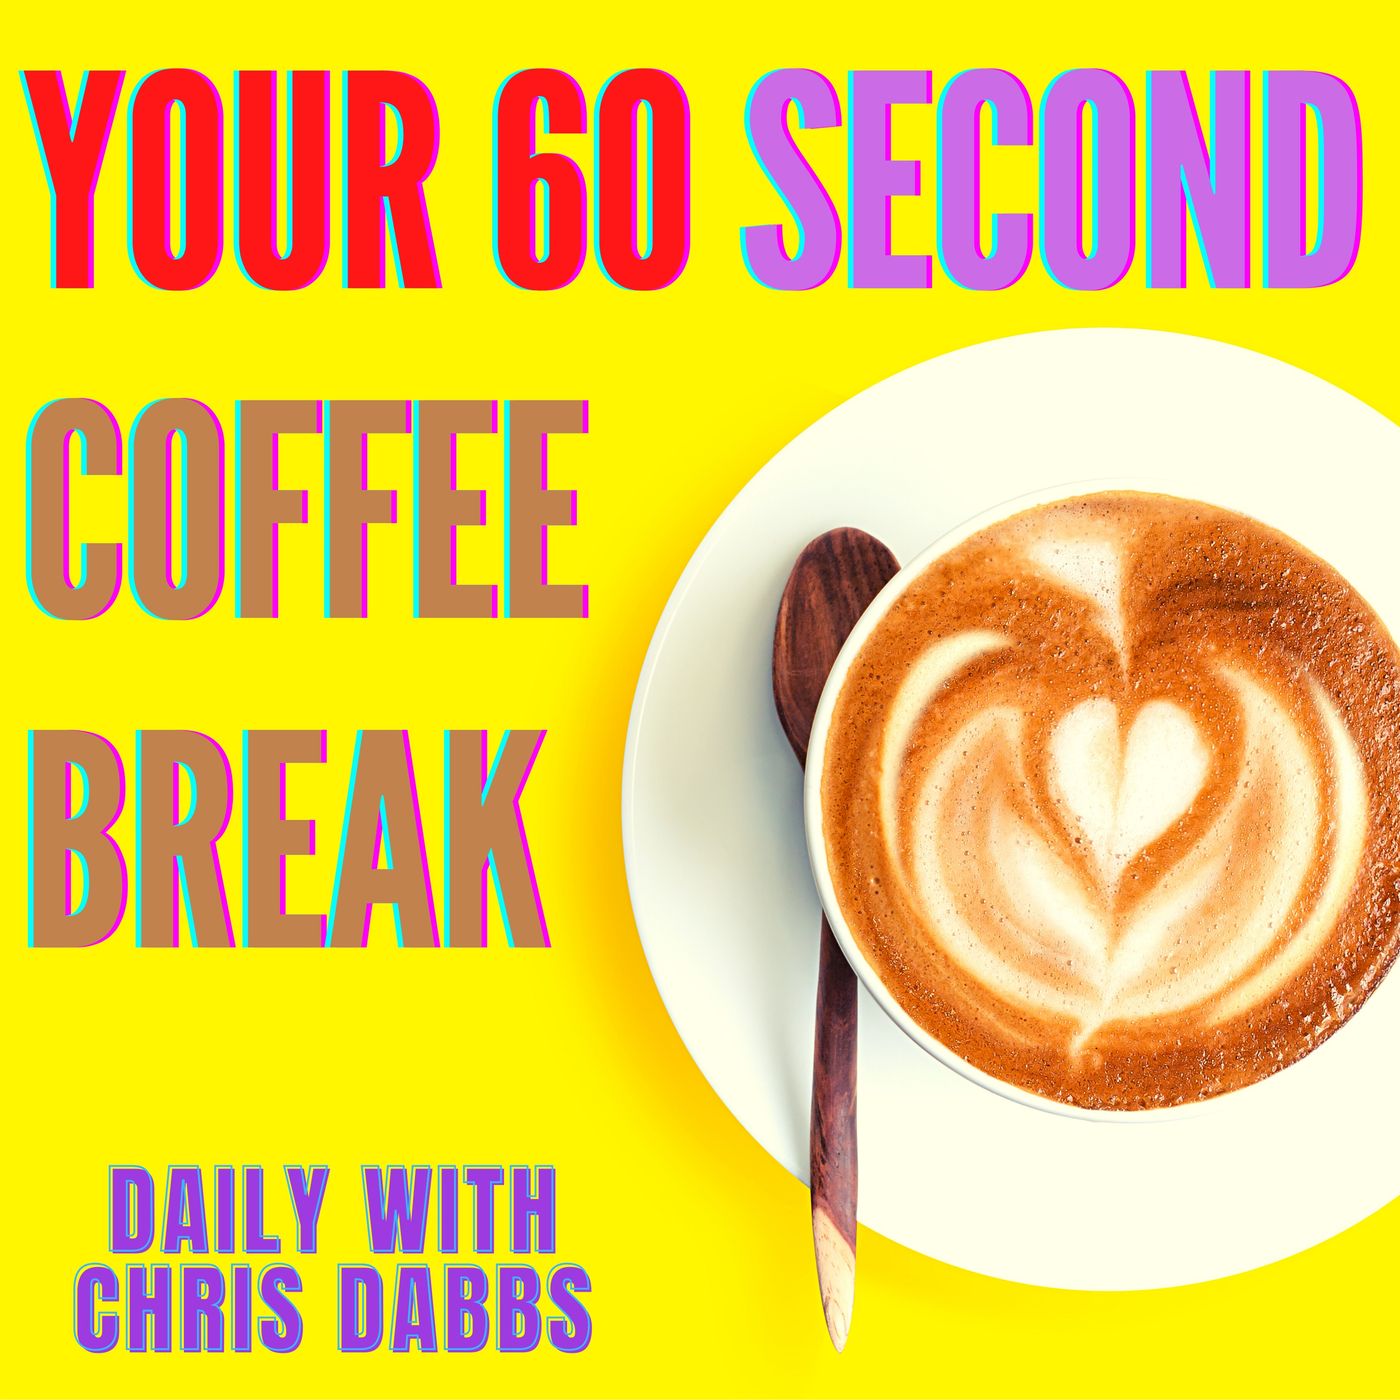 Your 60 Second Coffee Break with Chris Dabbs - Episode 50 Image